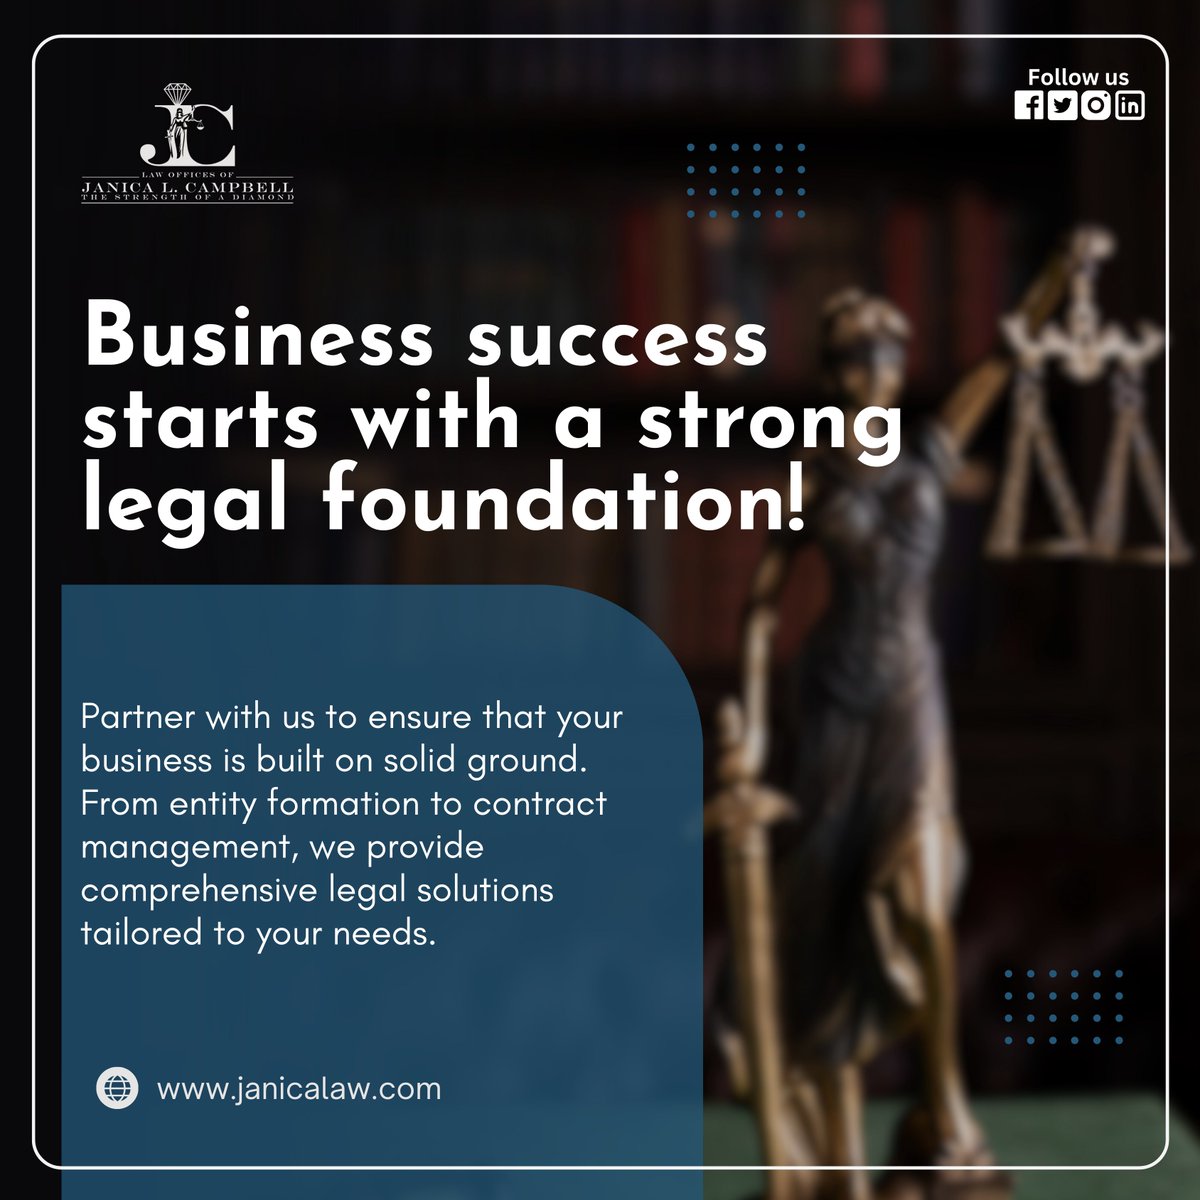 🌟 Is your business built on a strong legal foundation? 💼 Let us help you lay the groundwork for success! Partner with Janica Law to ensure your business is legally sound from the start.

#BusinessLaw #LegalFoundation #Entrepreneurship #StartUpSuccess #BusinessSuccess #JanicaLaw